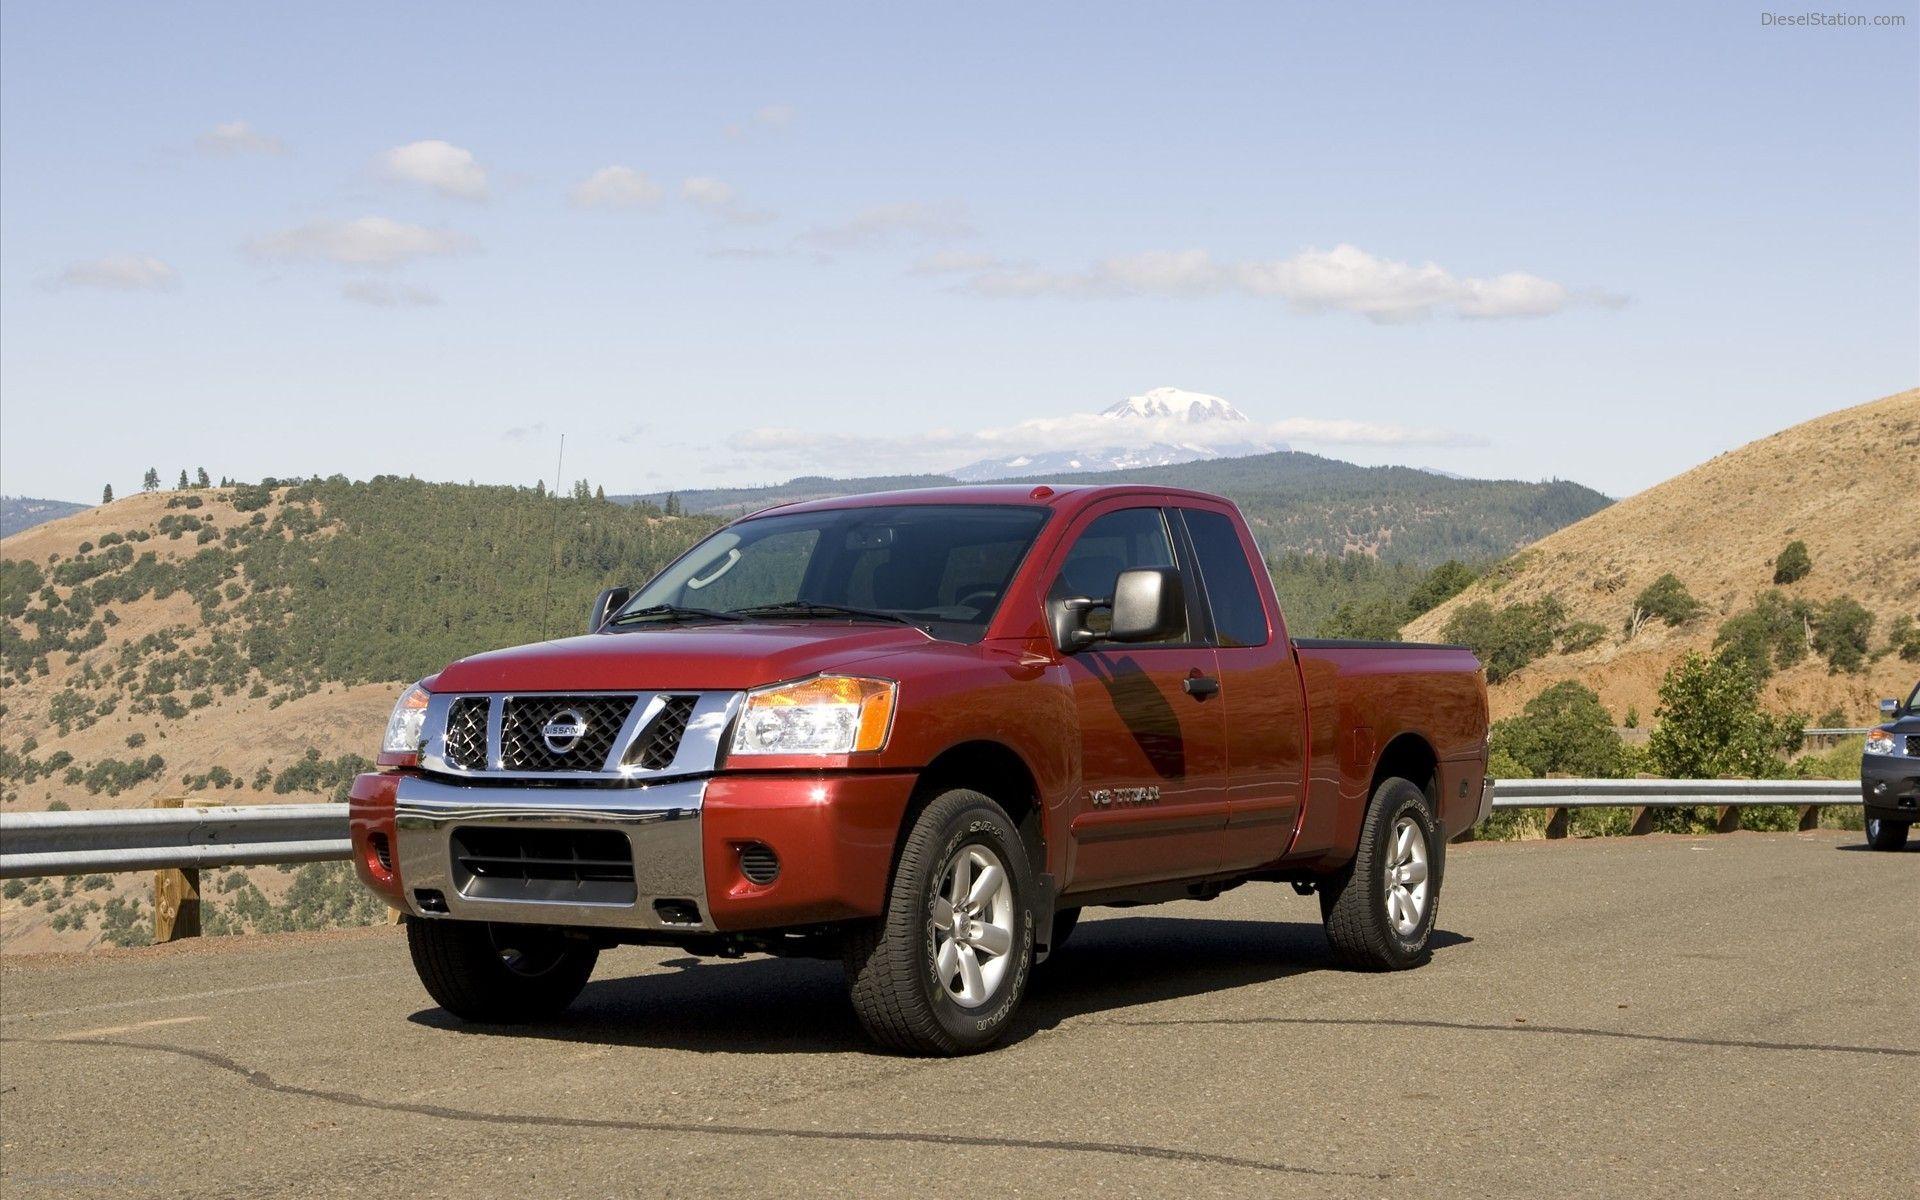 Nissan Titan 2010 Widescreen Exotic Car Picture of 14, Diesel